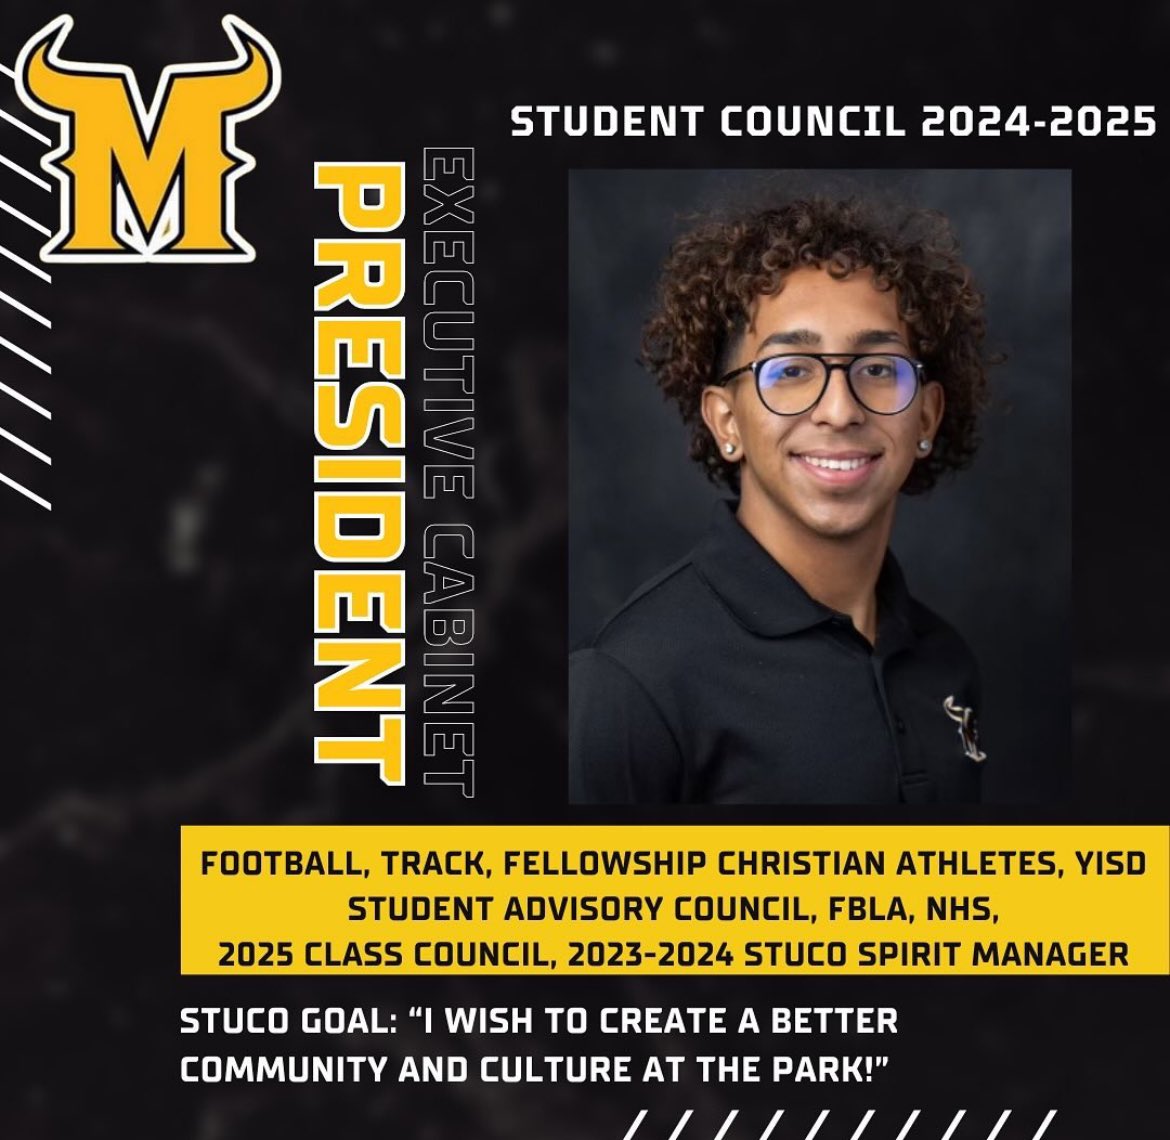 I am excited to start my senior year as Student Council President! I have a lot of great things planned and I can’t wait to work with my council. @phsmats @PHSMatadorFB @Parkland_Press @track_parkland @leighadrian @jdherna4 @RealJesseTovar @JimmyMcClain14